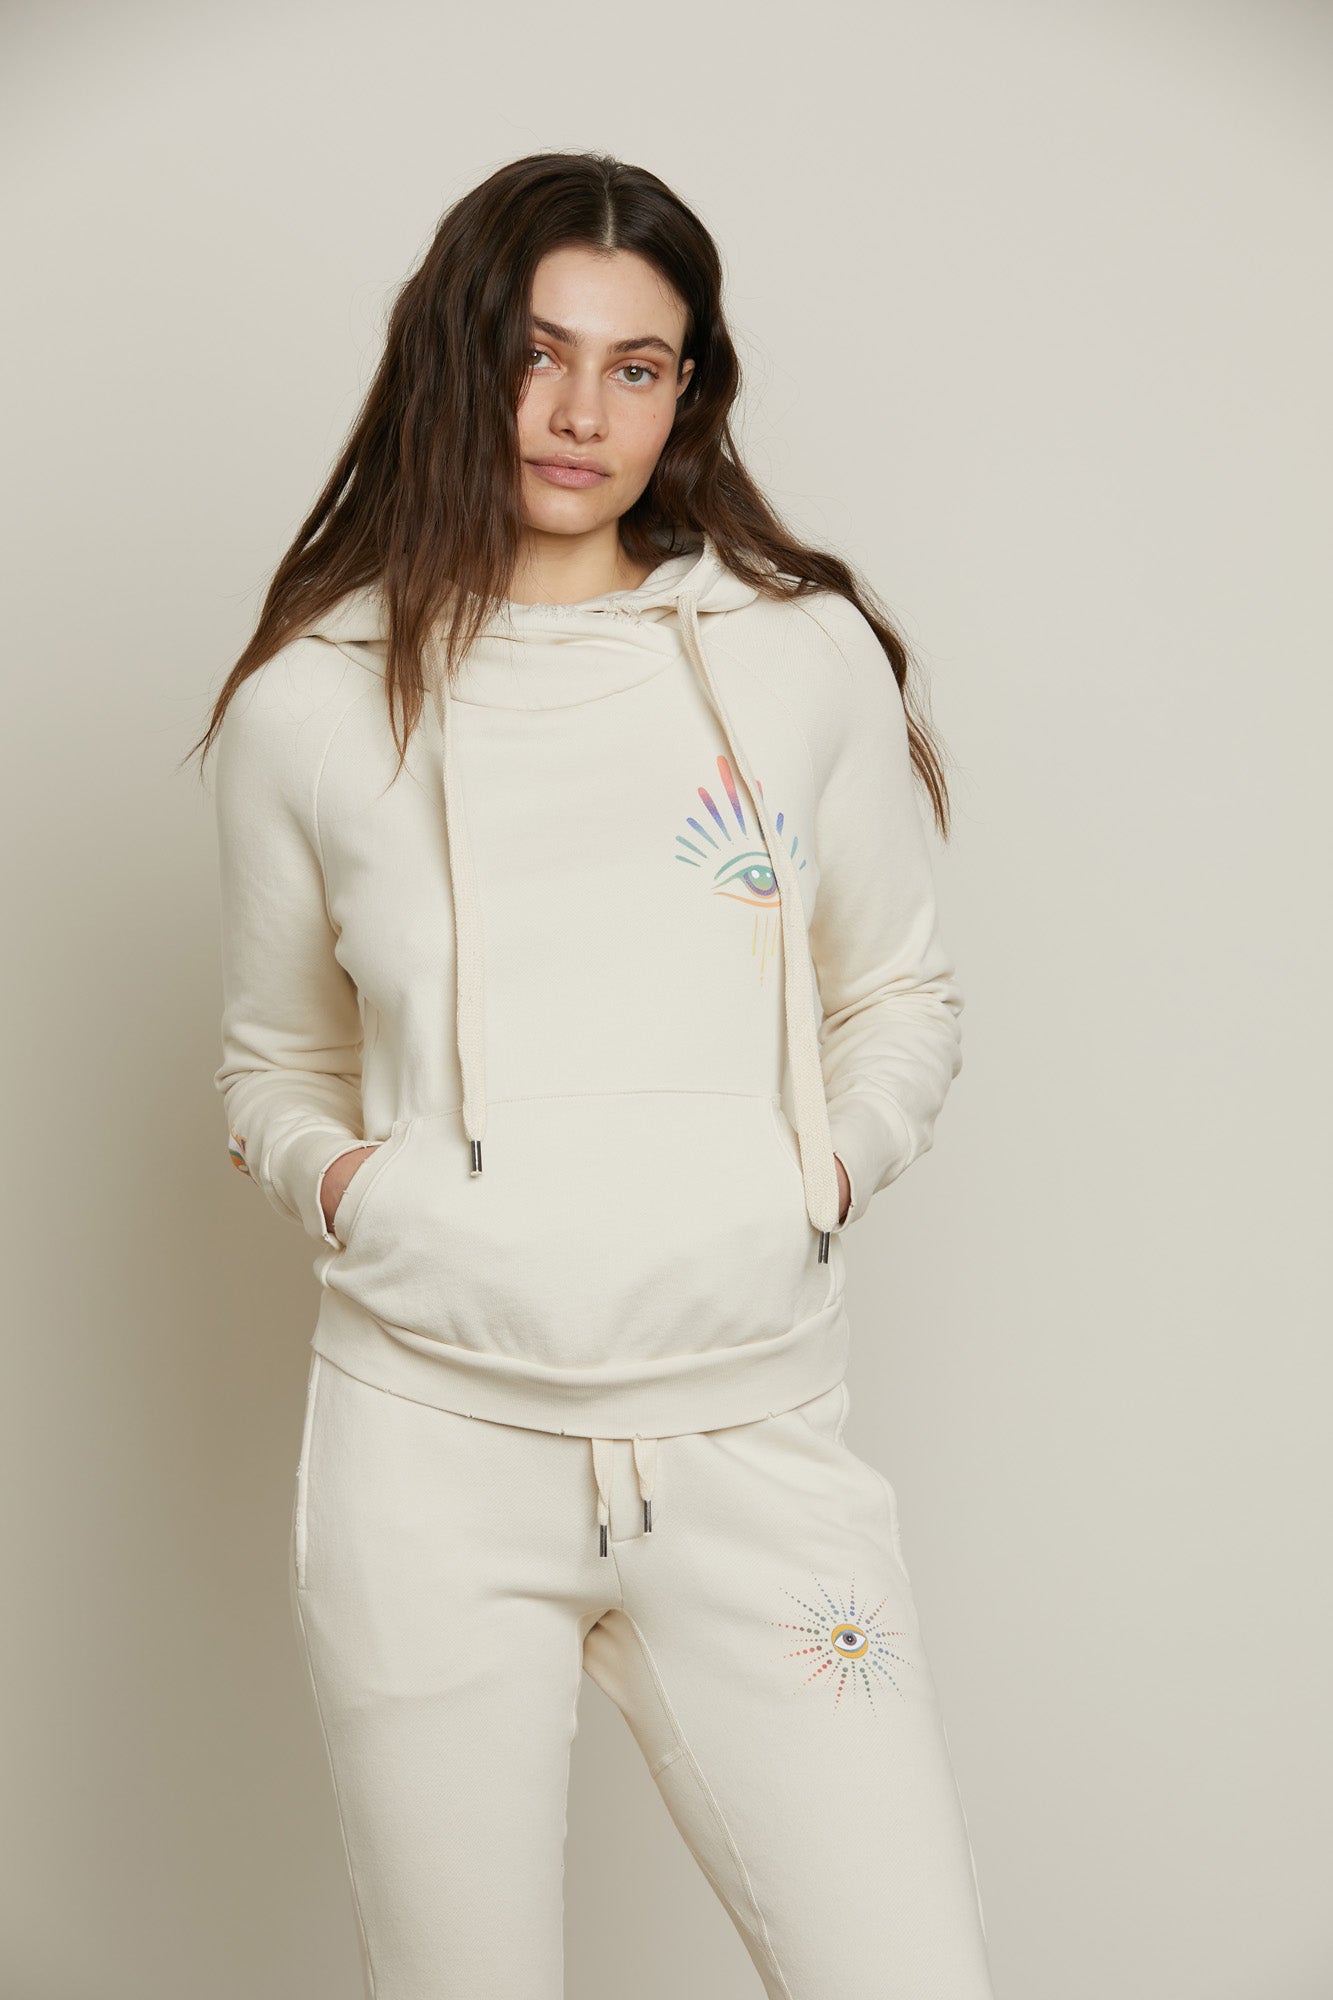 NSF x Jacquie Aiche Lisse Hoodie, Eye Candy, View 5 hand in pocket